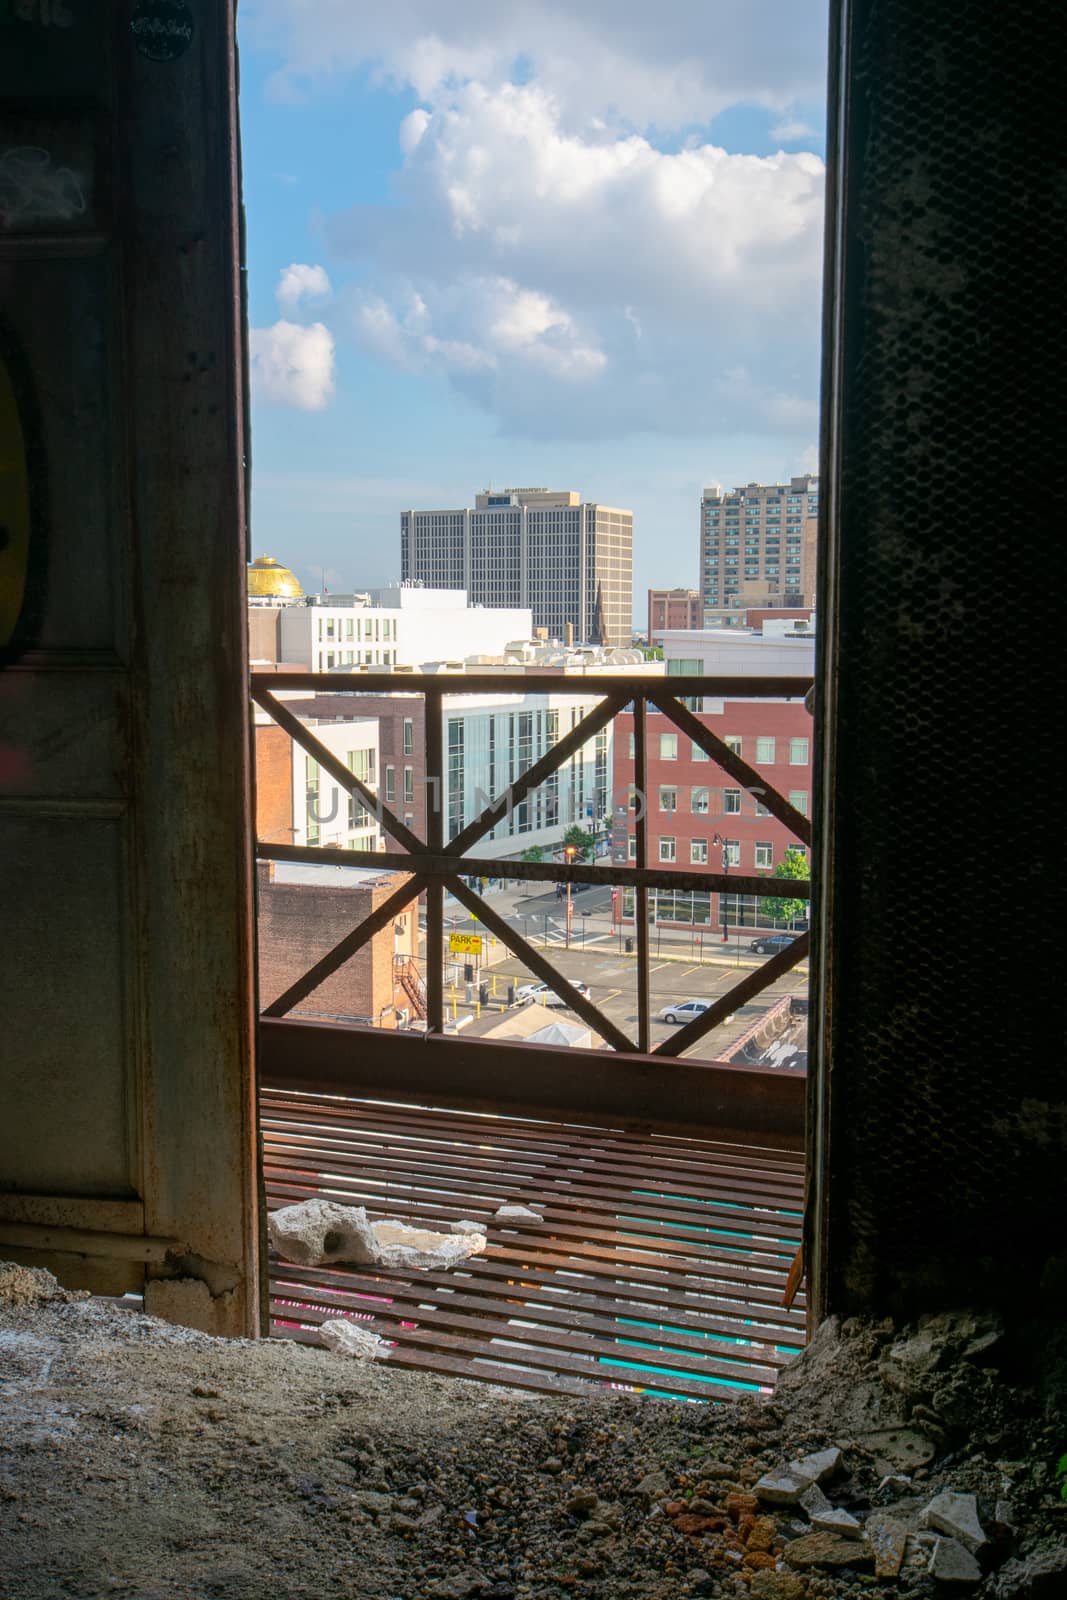 Looking Out an Open Door in an Abandoned Building at a City Skyl by bju12290